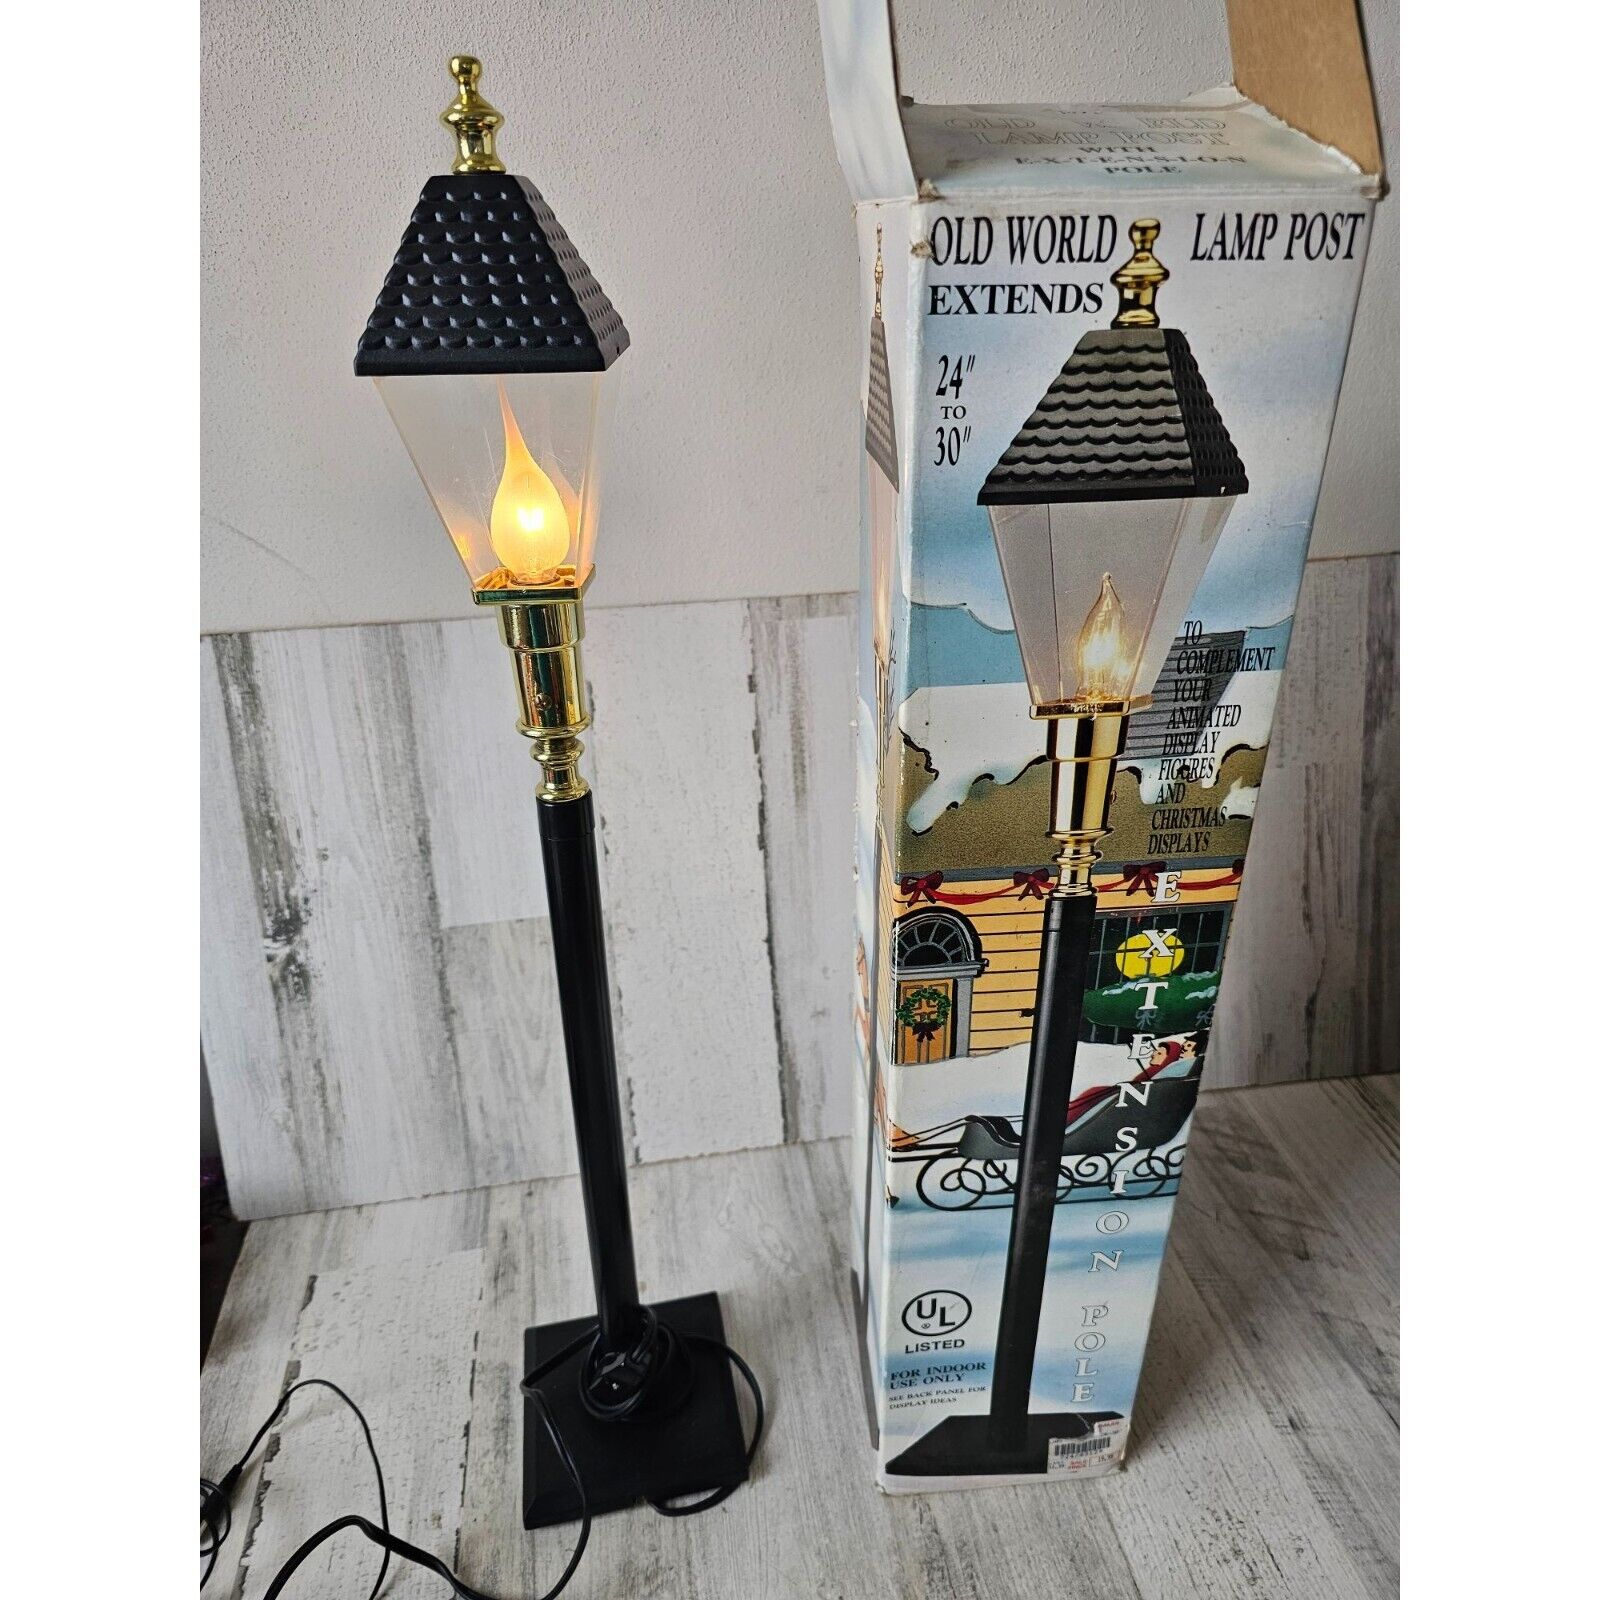 Telco old world lamp post light vintage pole extension home decor